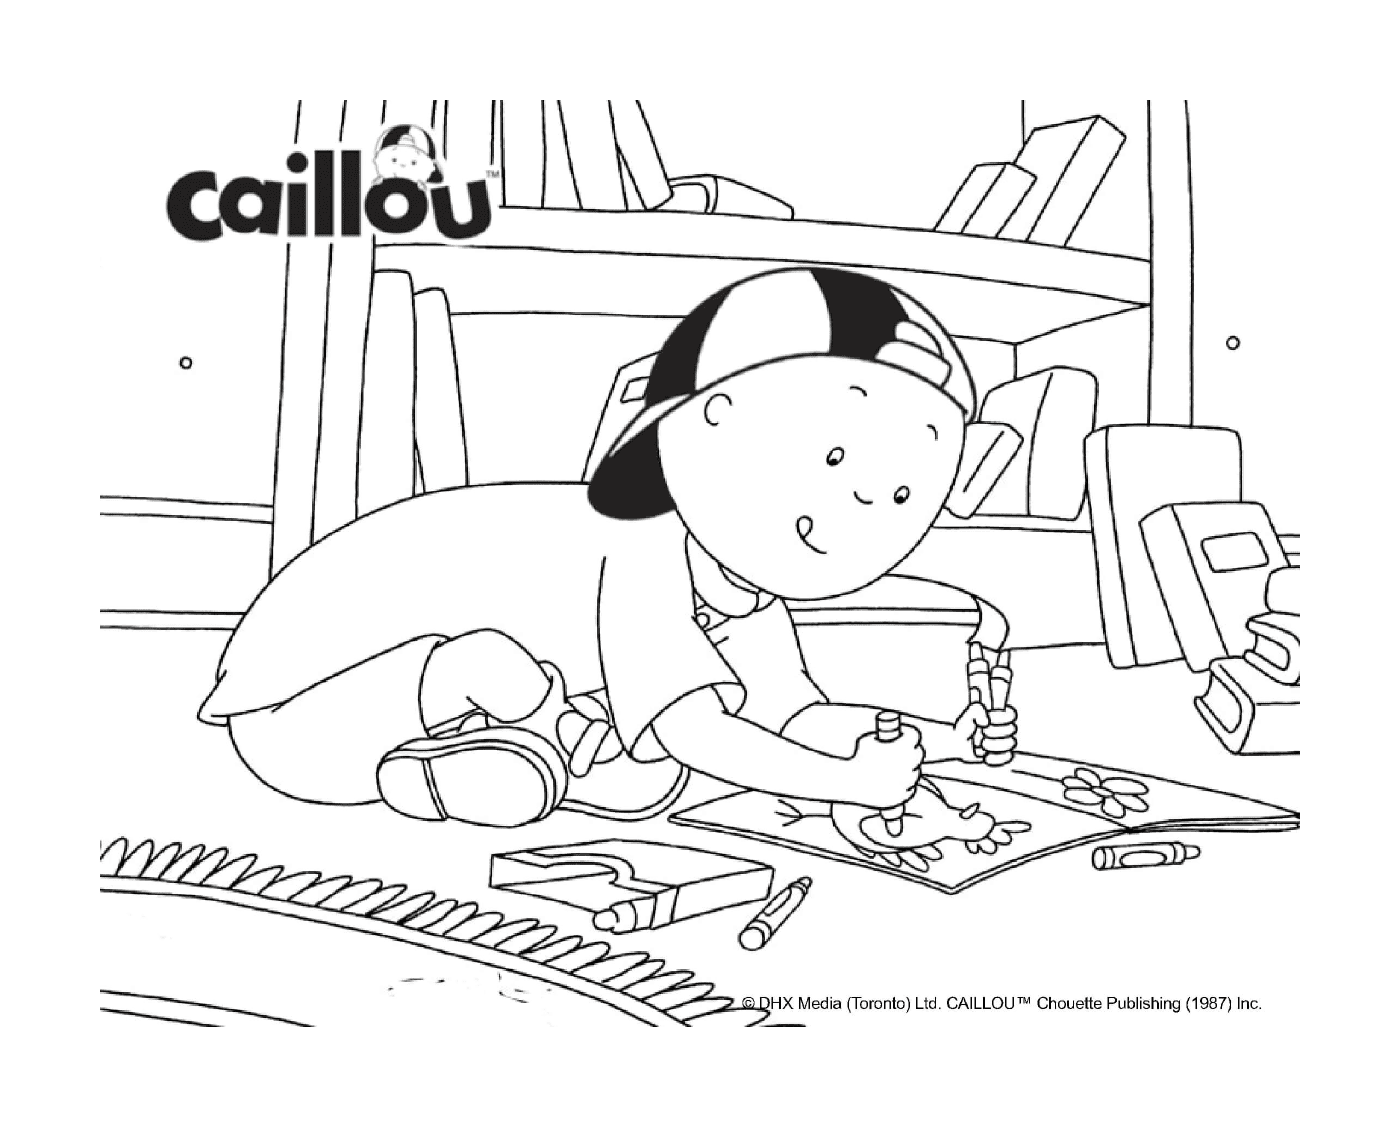  Coloring of the new book by Caillou 